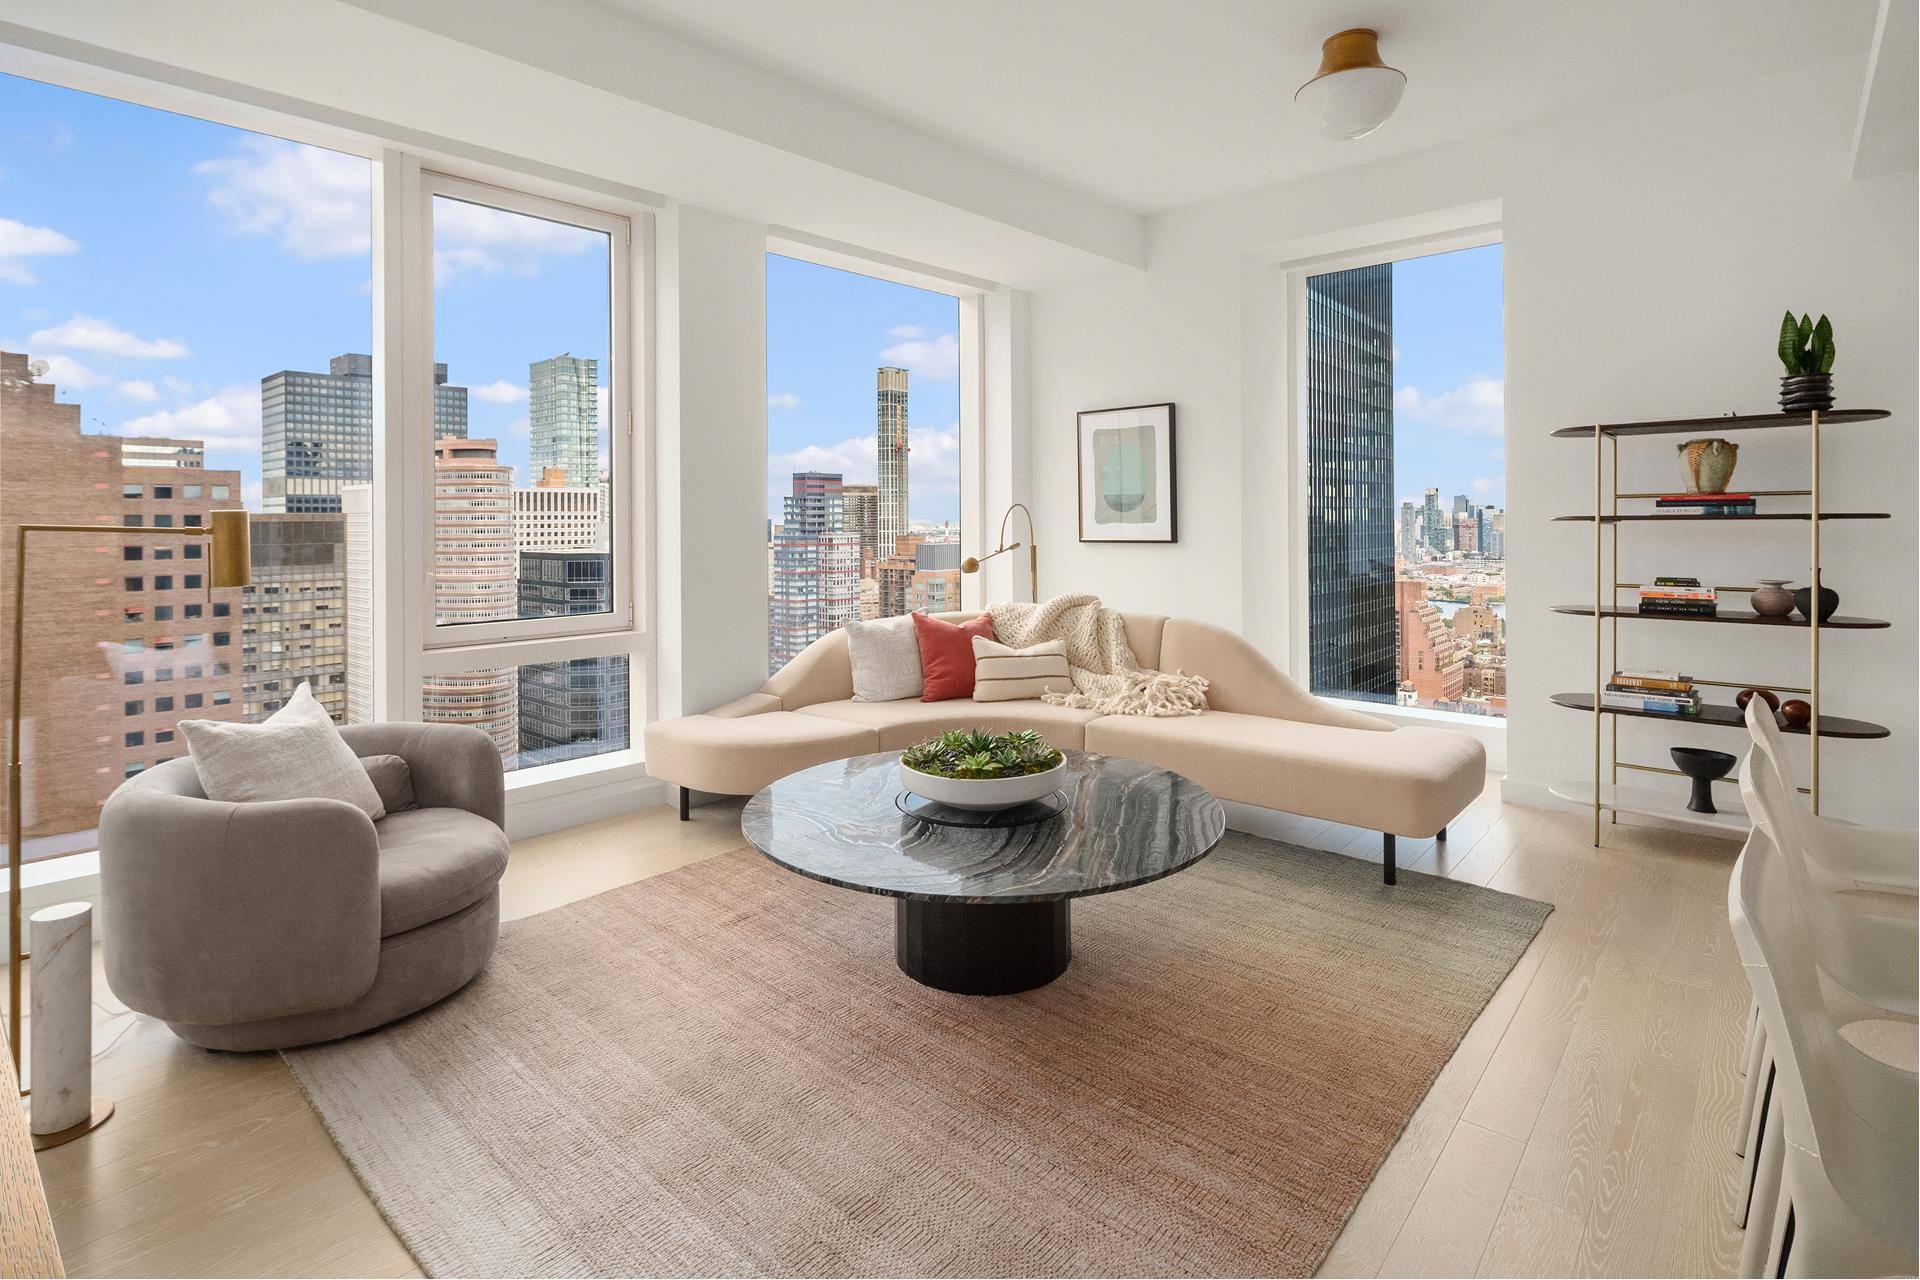 Immediate Occupancy. This expansive two bedroom, two and a half bathroom residence designed by Champalimaud offers North, East, and Southern exposures through floor to ceiling windows.